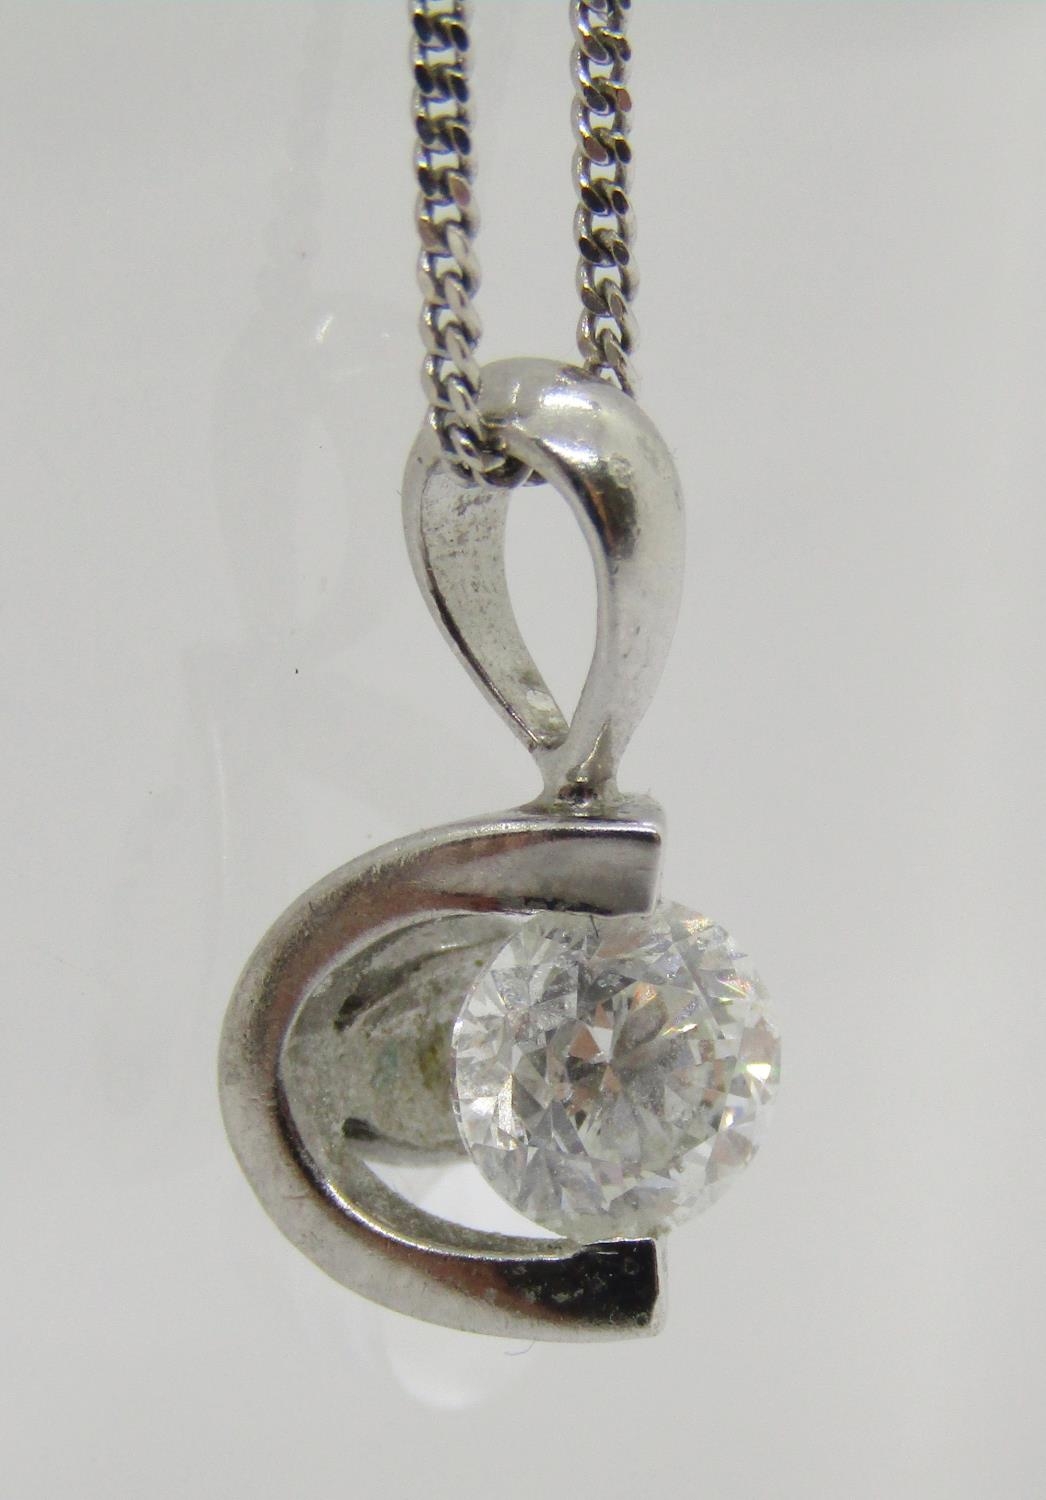 18ct white gold tension set diamond solitaire pendant necklace, the diamond 0.20ct approx, pendant - Image 4 of 7